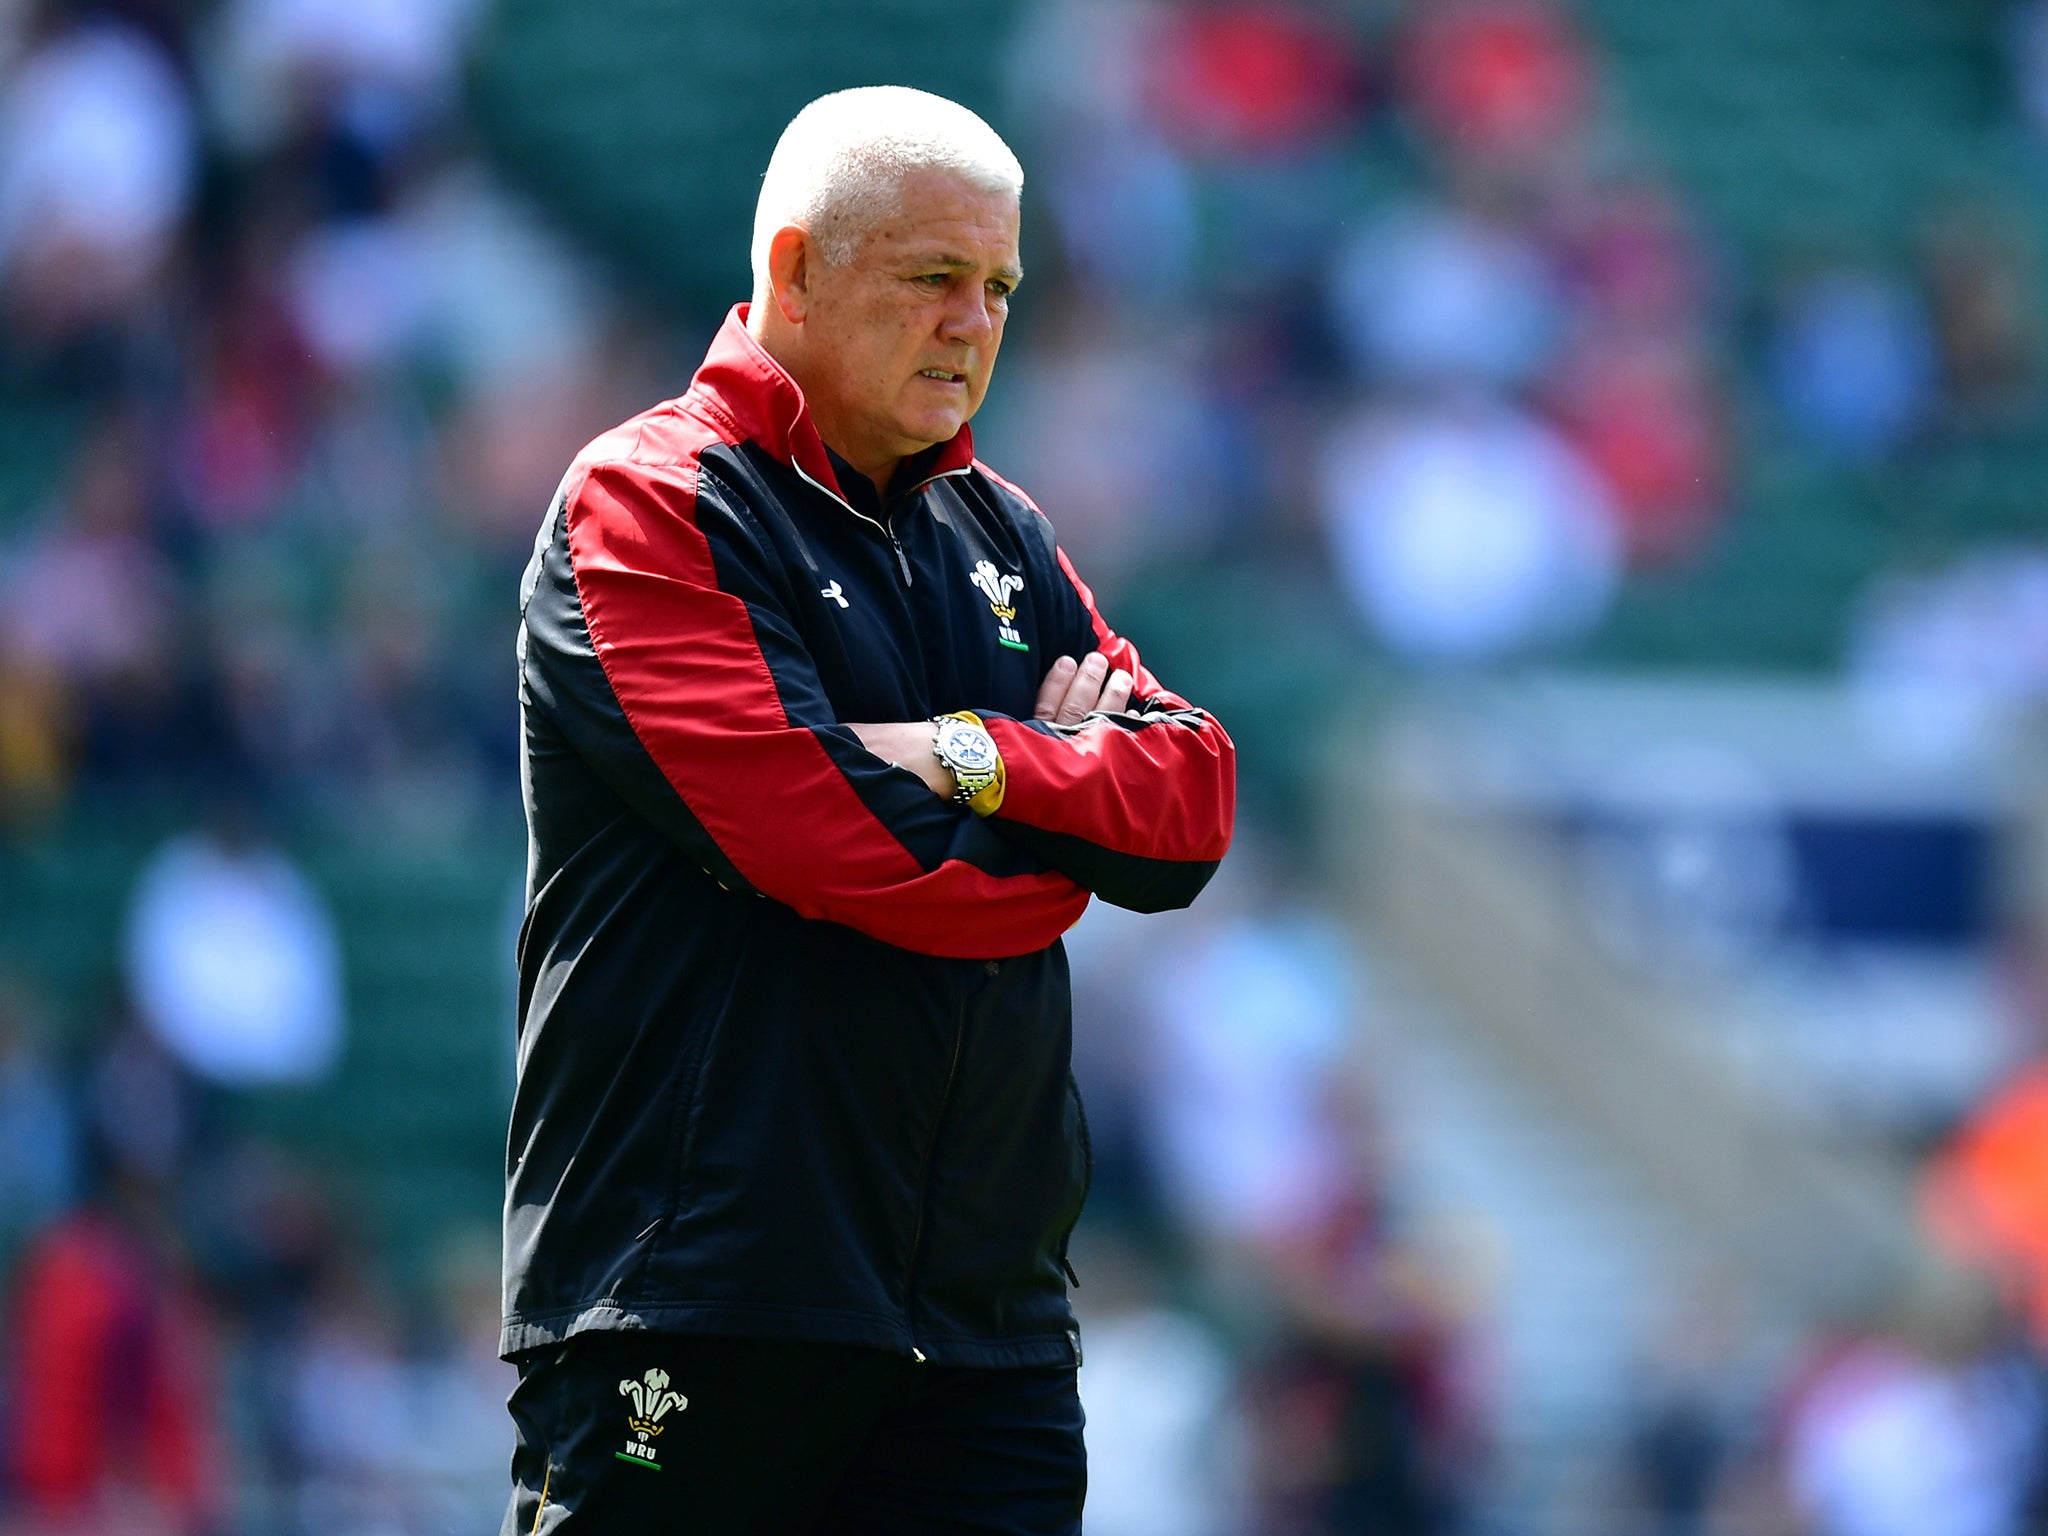 Warren Gatland's claim that Wales can win the Rugby World Cup will be put to the test this autumn